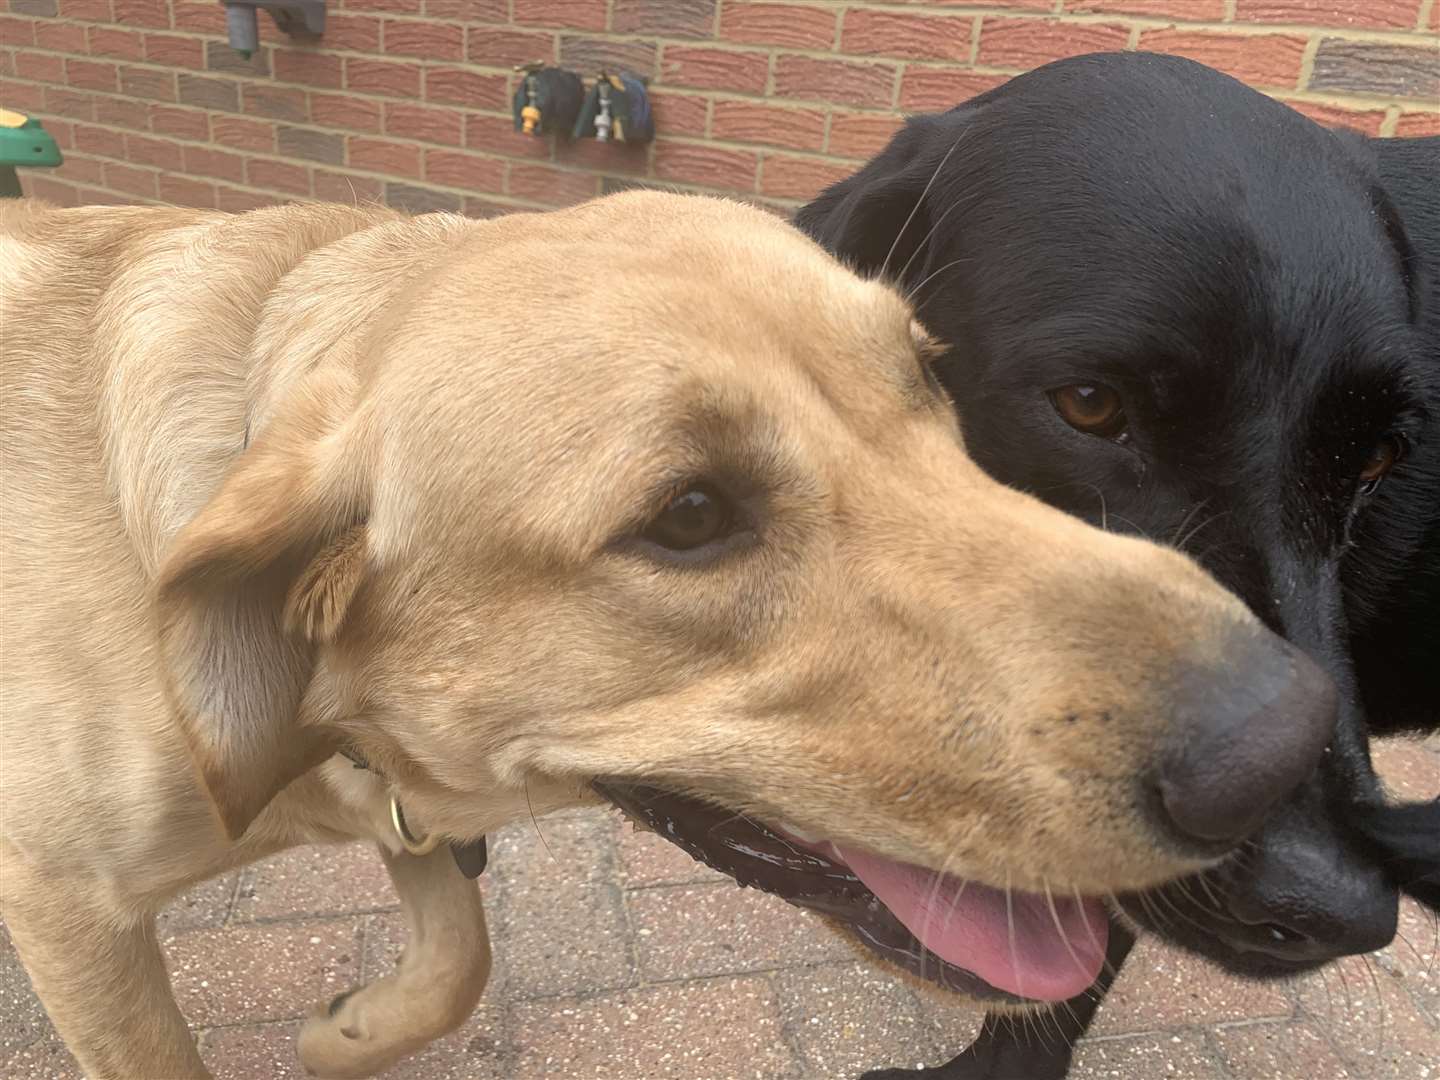 Ziggy the labrador giving his buddy Jet and smooch